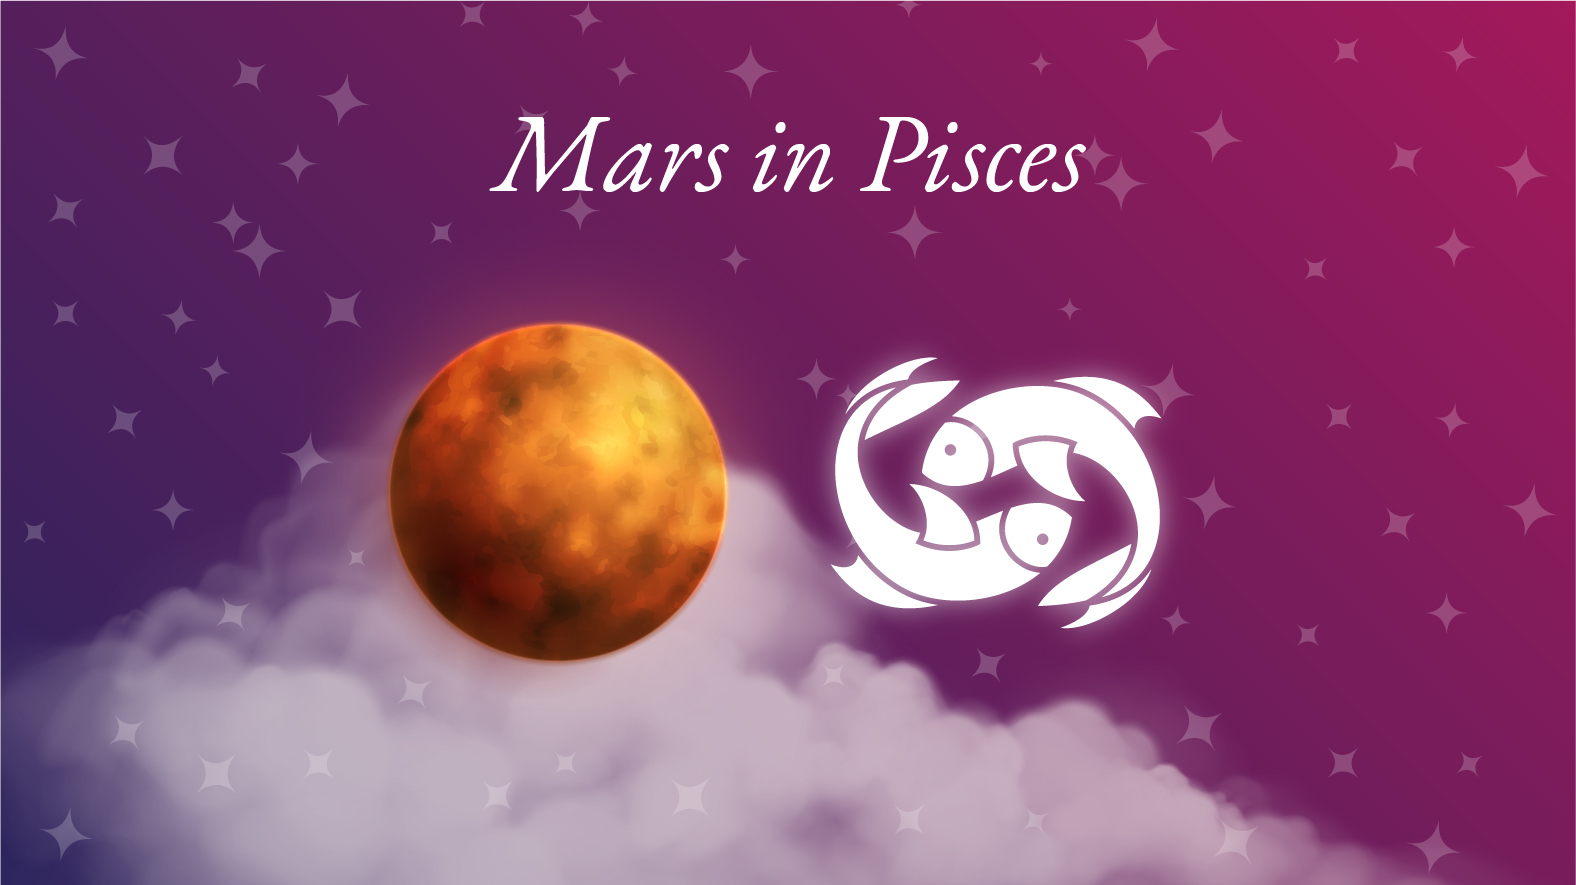 Mars in Pisces Meaning